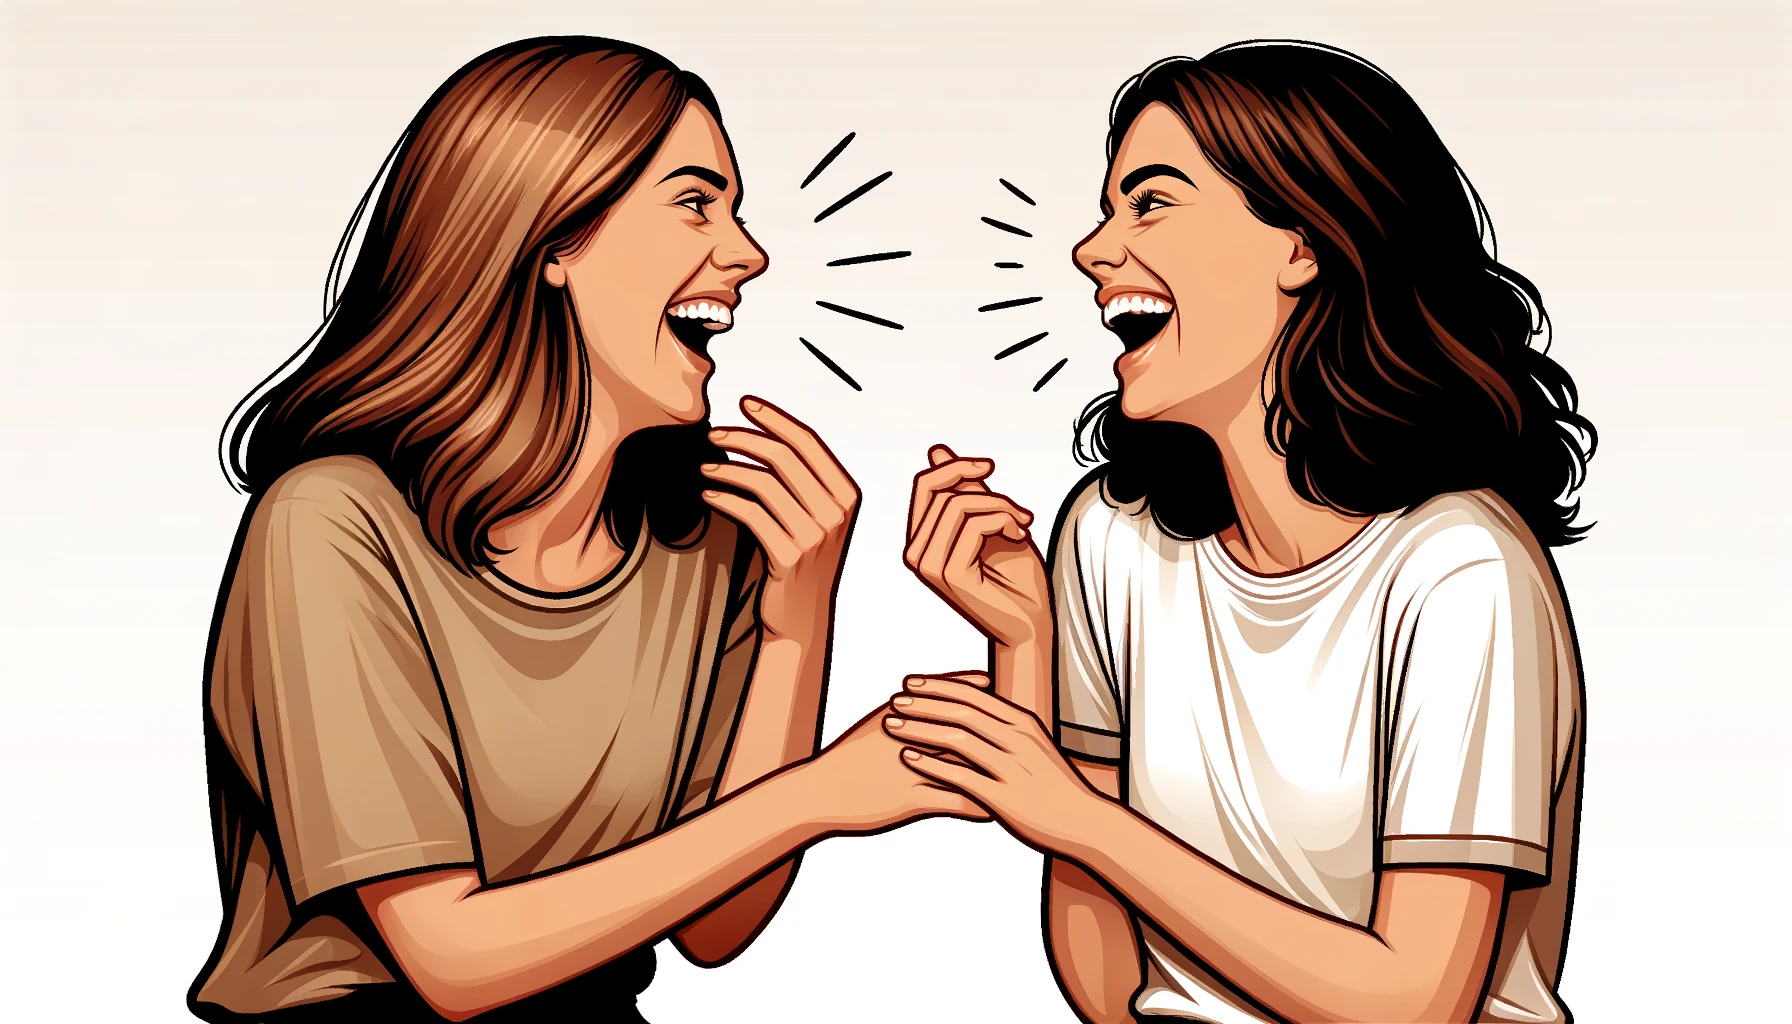 two friends making jokes and laughing